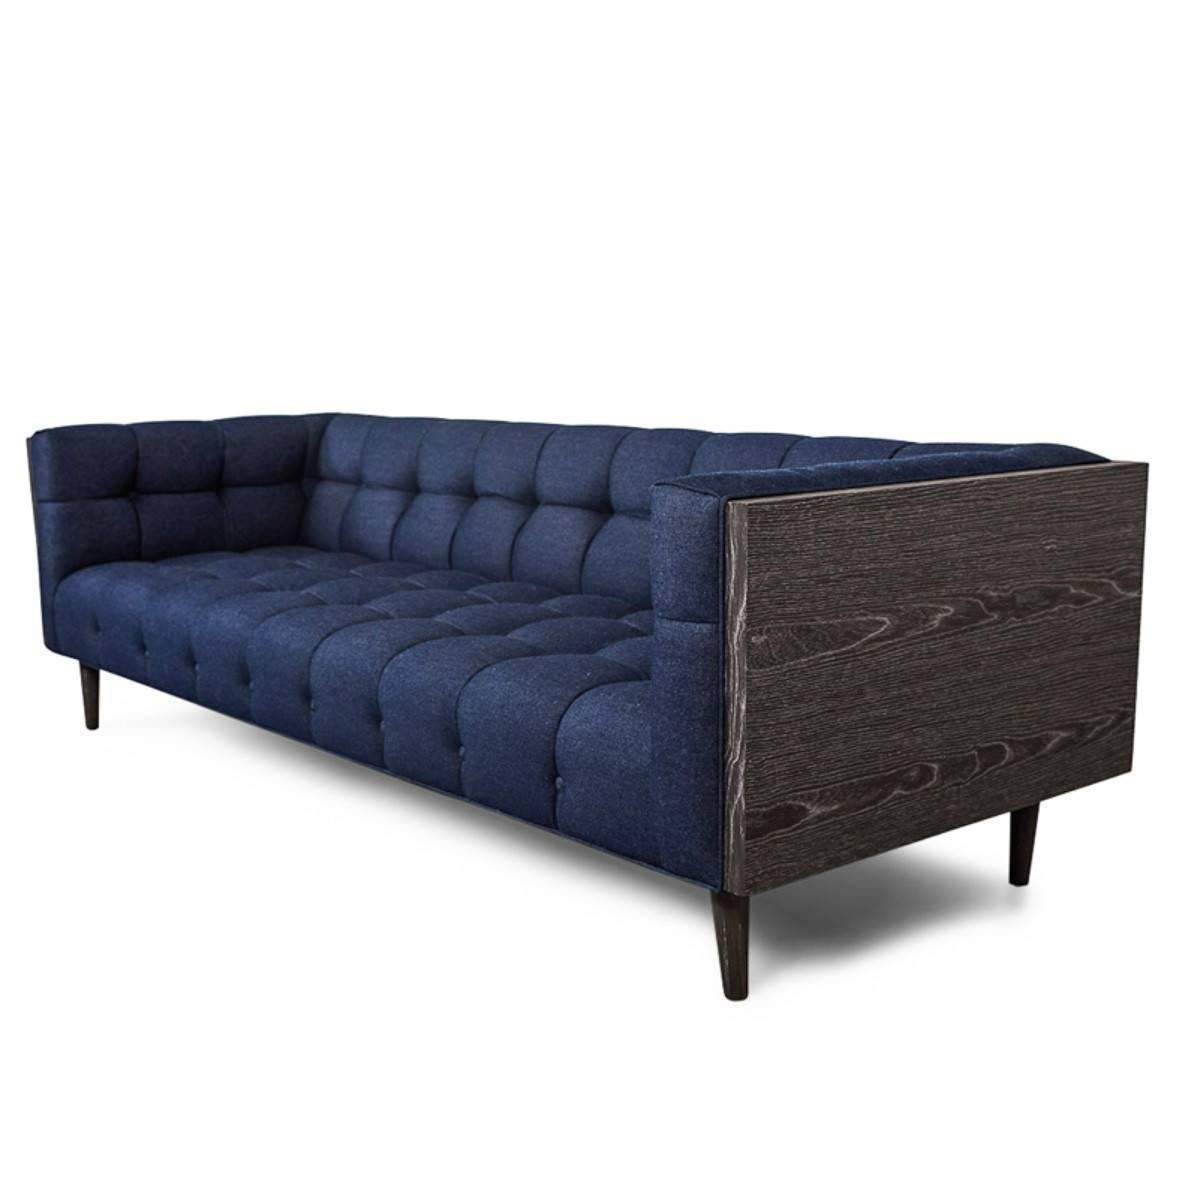 This sofa is a nod to Classic Mid-Century Modern design. A tight, tufted back and seat makes for an extremely sleek sofa. Encased in a dark walnut frame with matching cone legs, this a perfect piece to have floating in the middle of the room to